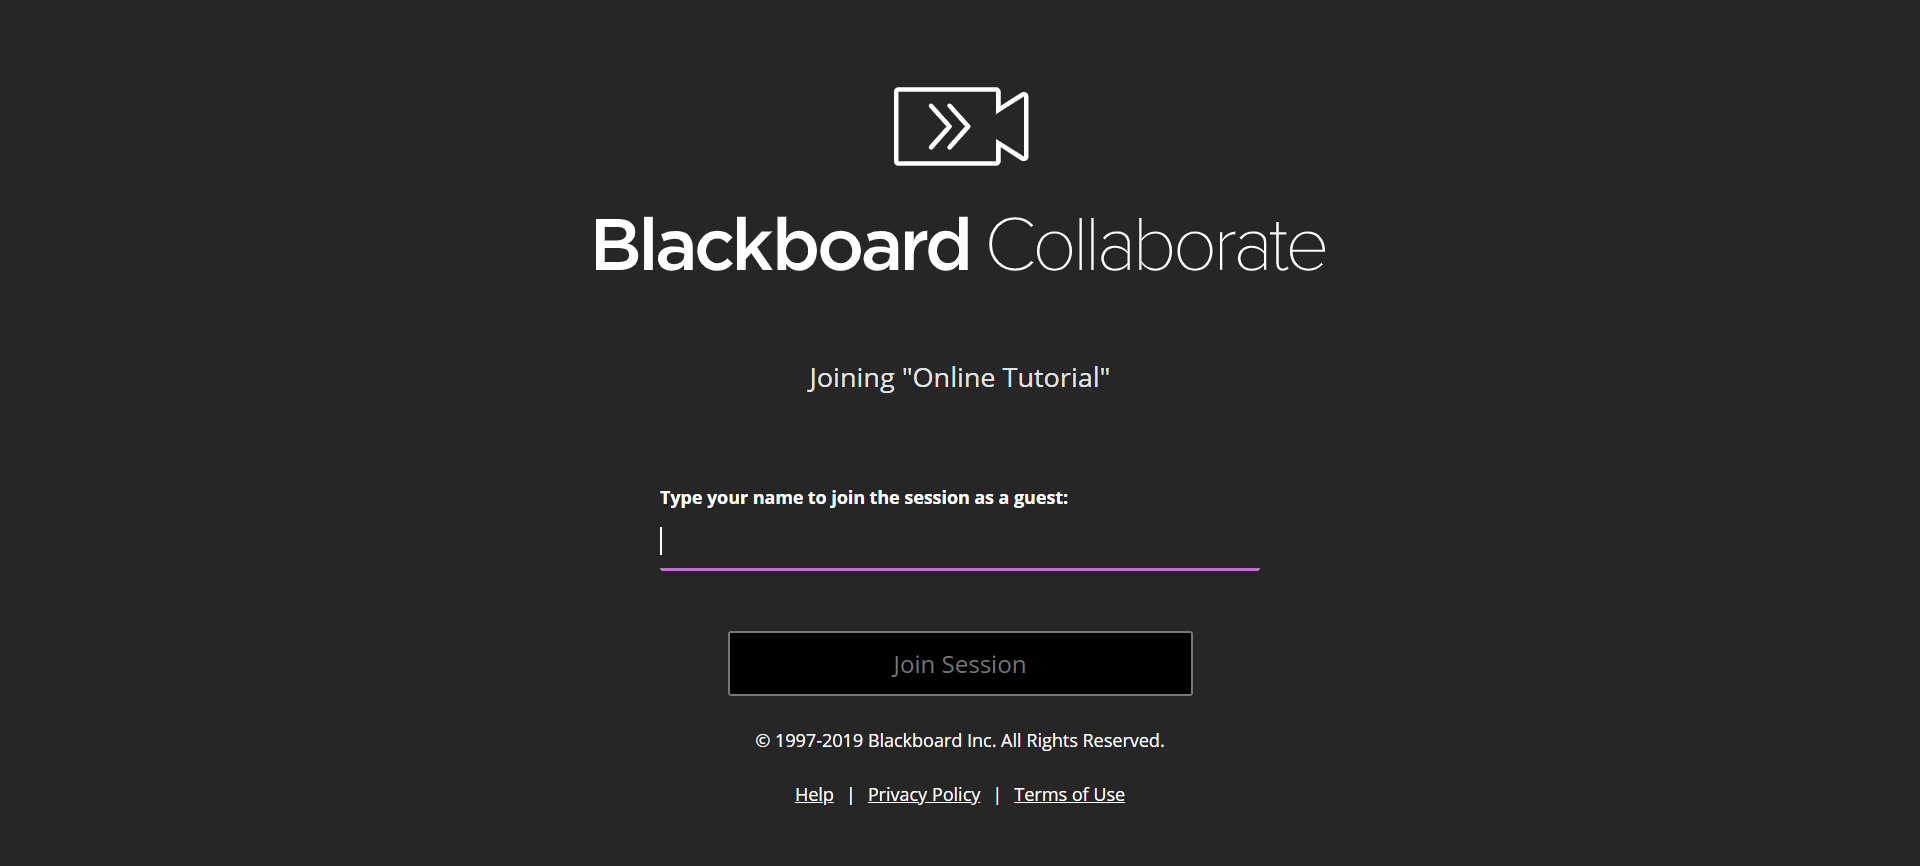 A screenshot of the Blackboard Collaborate Welcome Page. There is a Space to Add your name